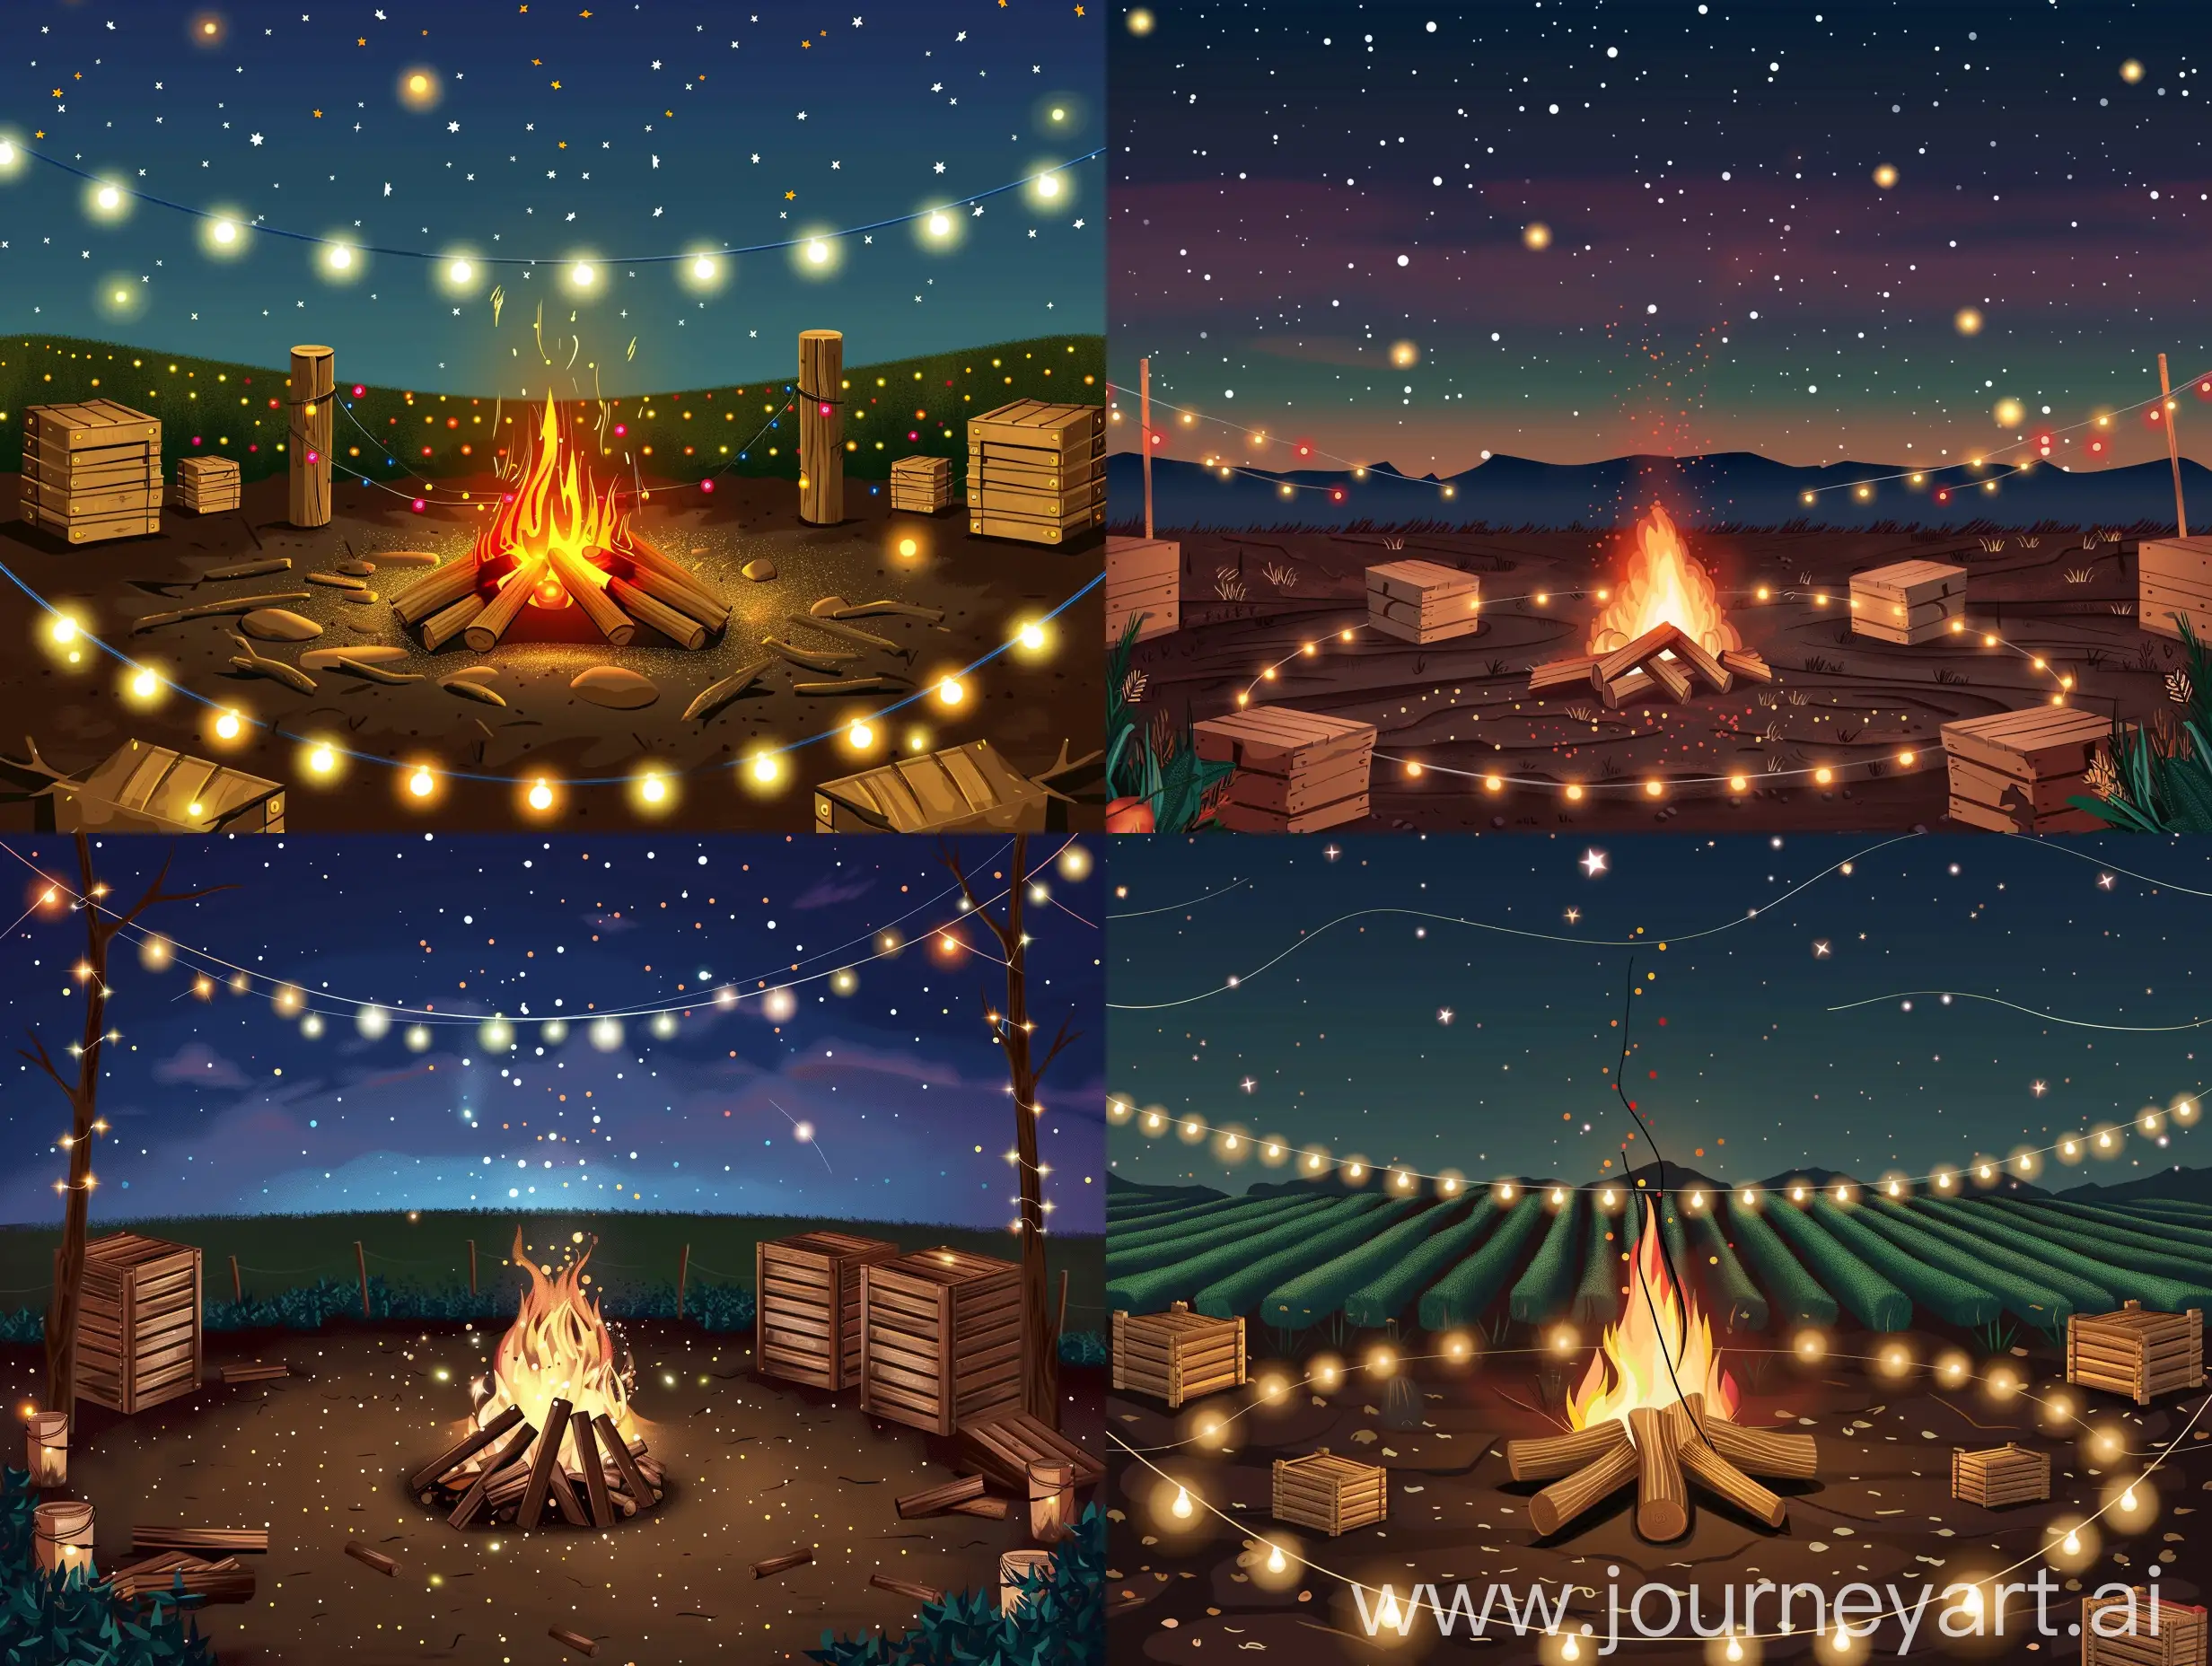 Rustic-Campfire-Scene-on-Arable-Land-with-Wooden-Crates-and-String-Lights